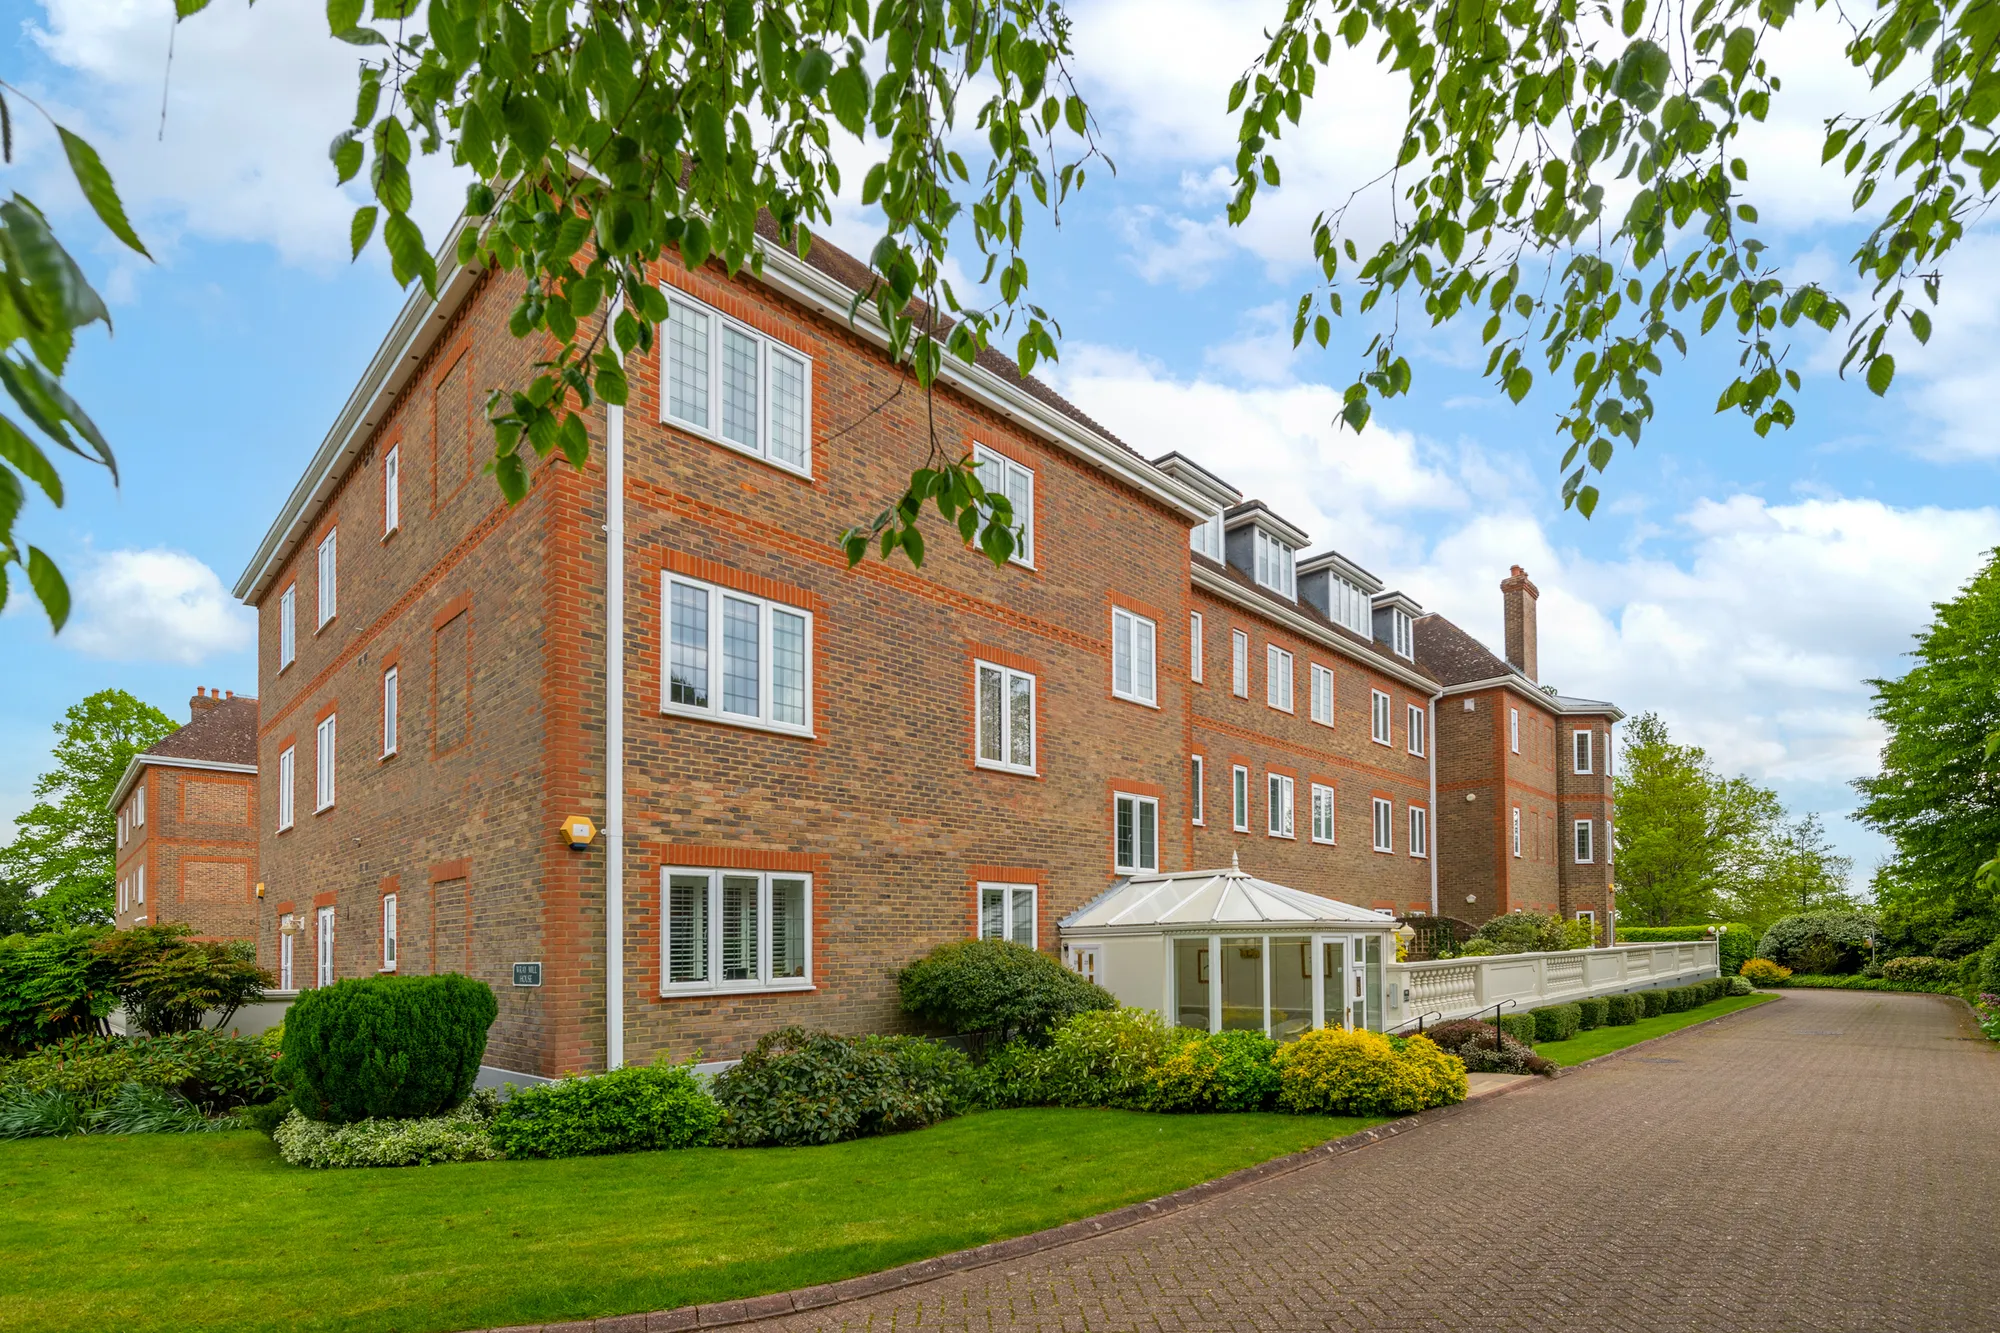 2 bed apartment for sale in Batts Hill, Reigate - Property Image 1